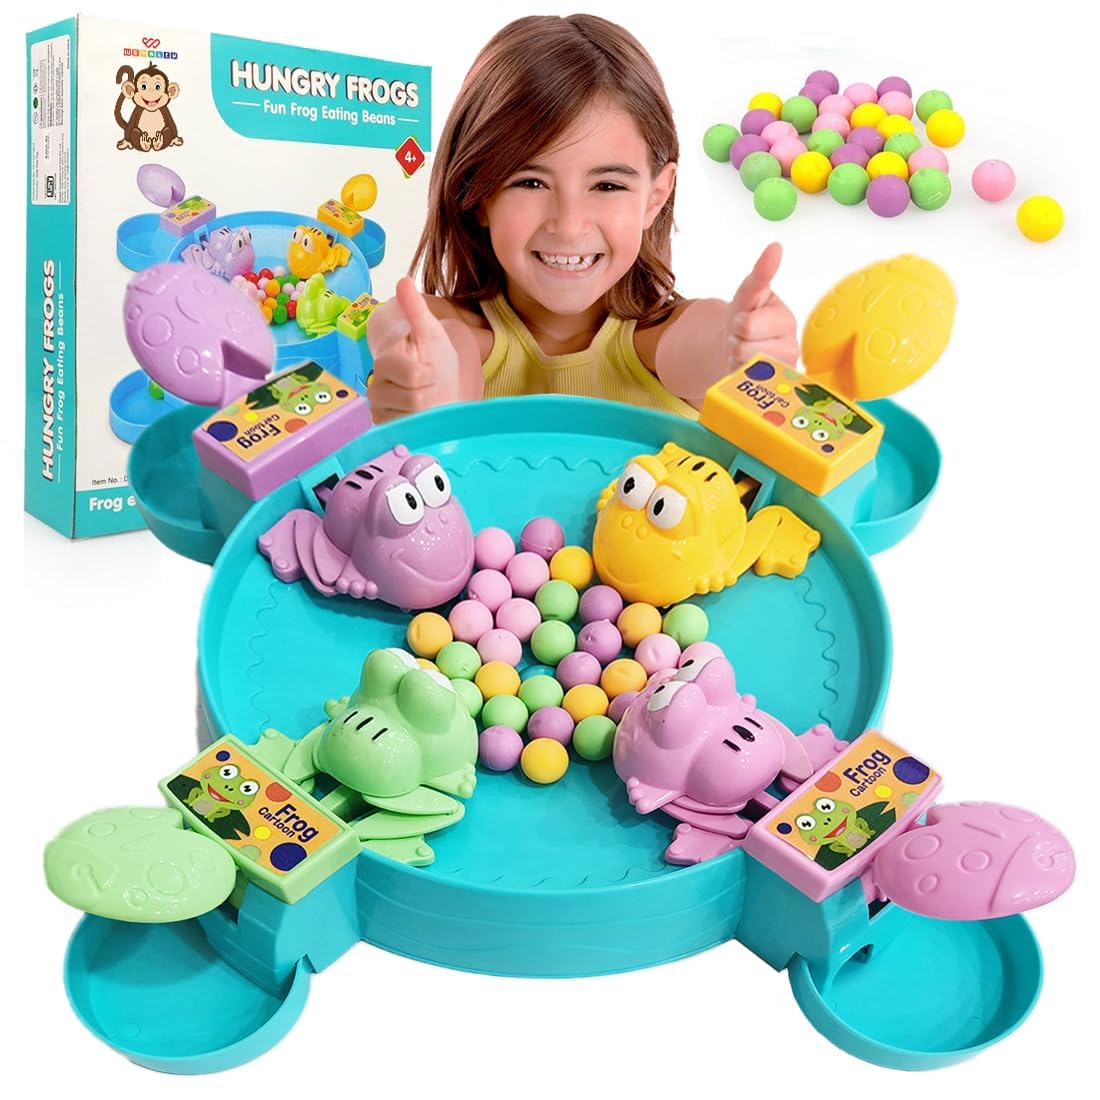 Braintastic Fun Hungry Frog Eating Beans Table Top Desktop Finger Toy Classic Board Game for Kids (4 Players)